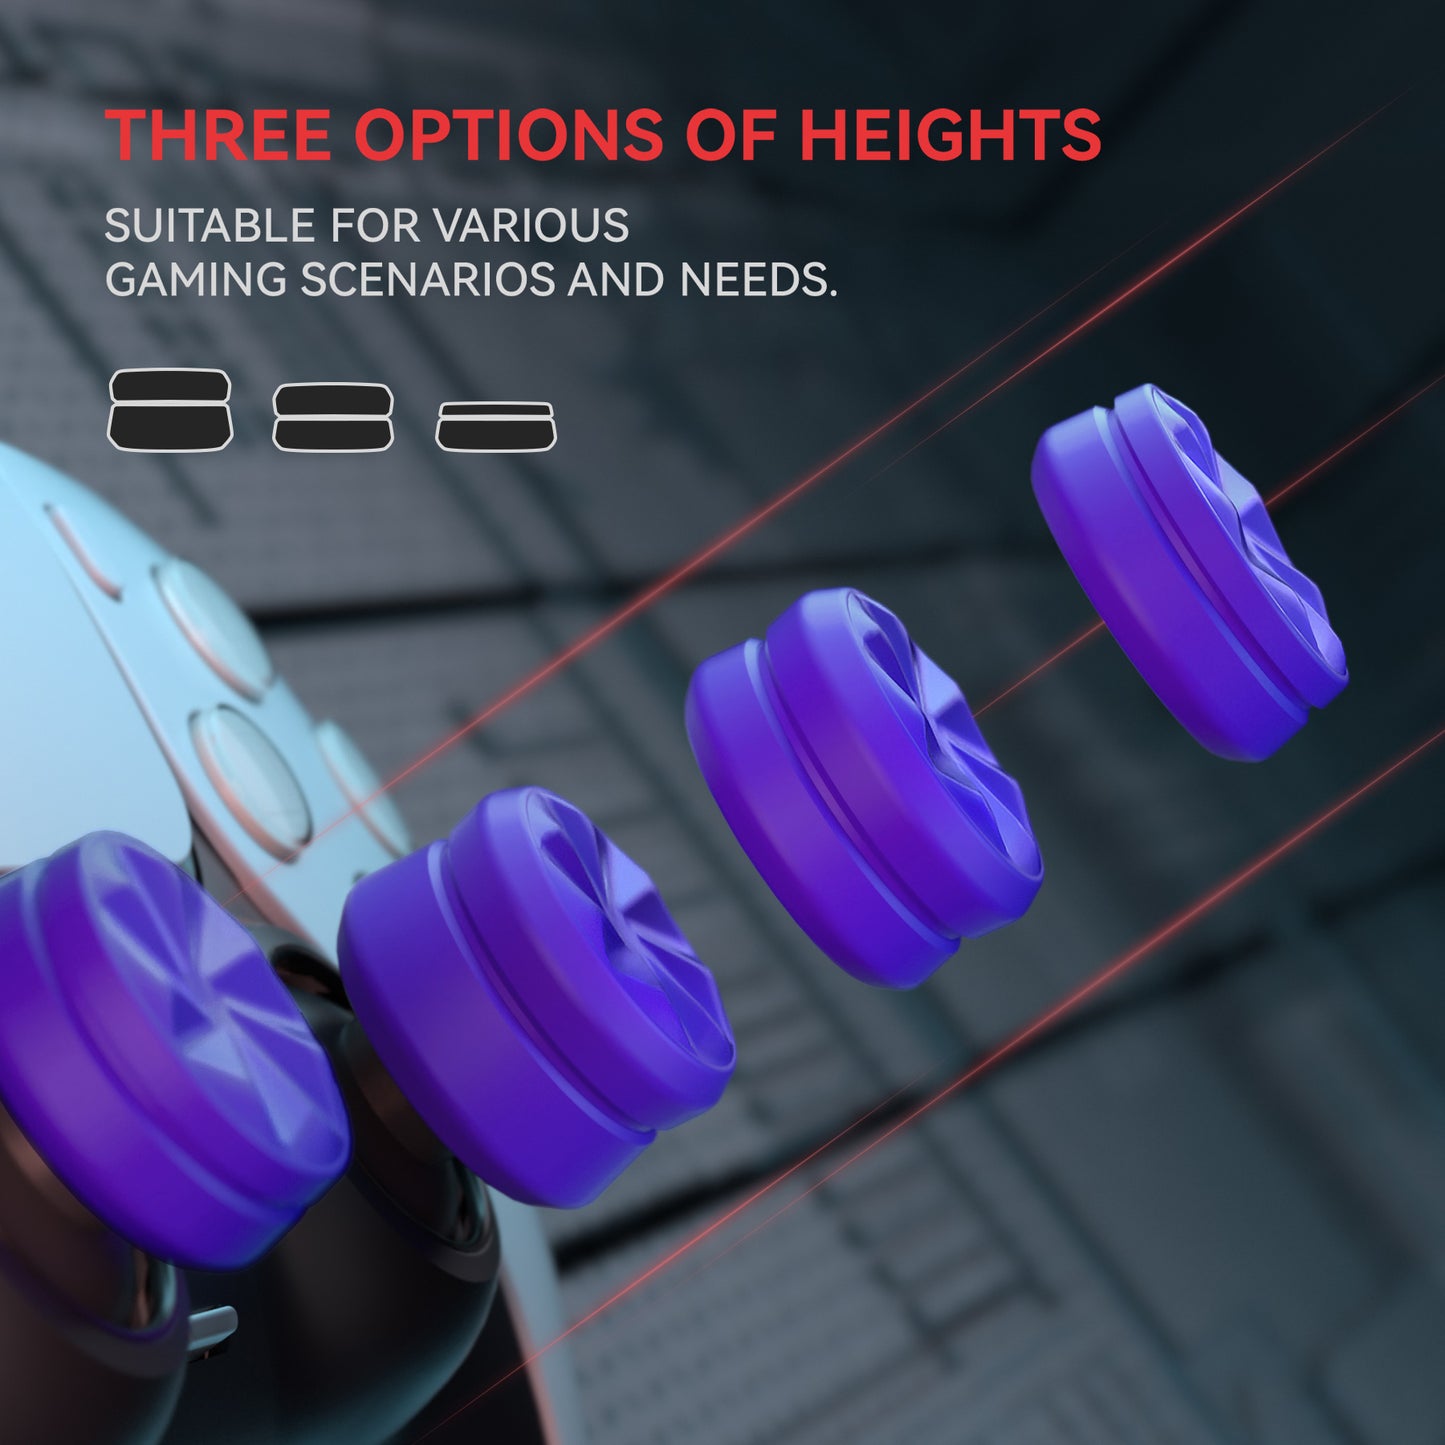 PlayVital 3 Height Hurricane Thumbs Cushion Caps Thumb Grips for ps5, for ps4, Thumbstick Grip Cover for Xbox Core Wireless Controller, Thumb Grips for Xbox One, Elite Series 2, for Switch Pro - Purple - PJM3064 PlayVital